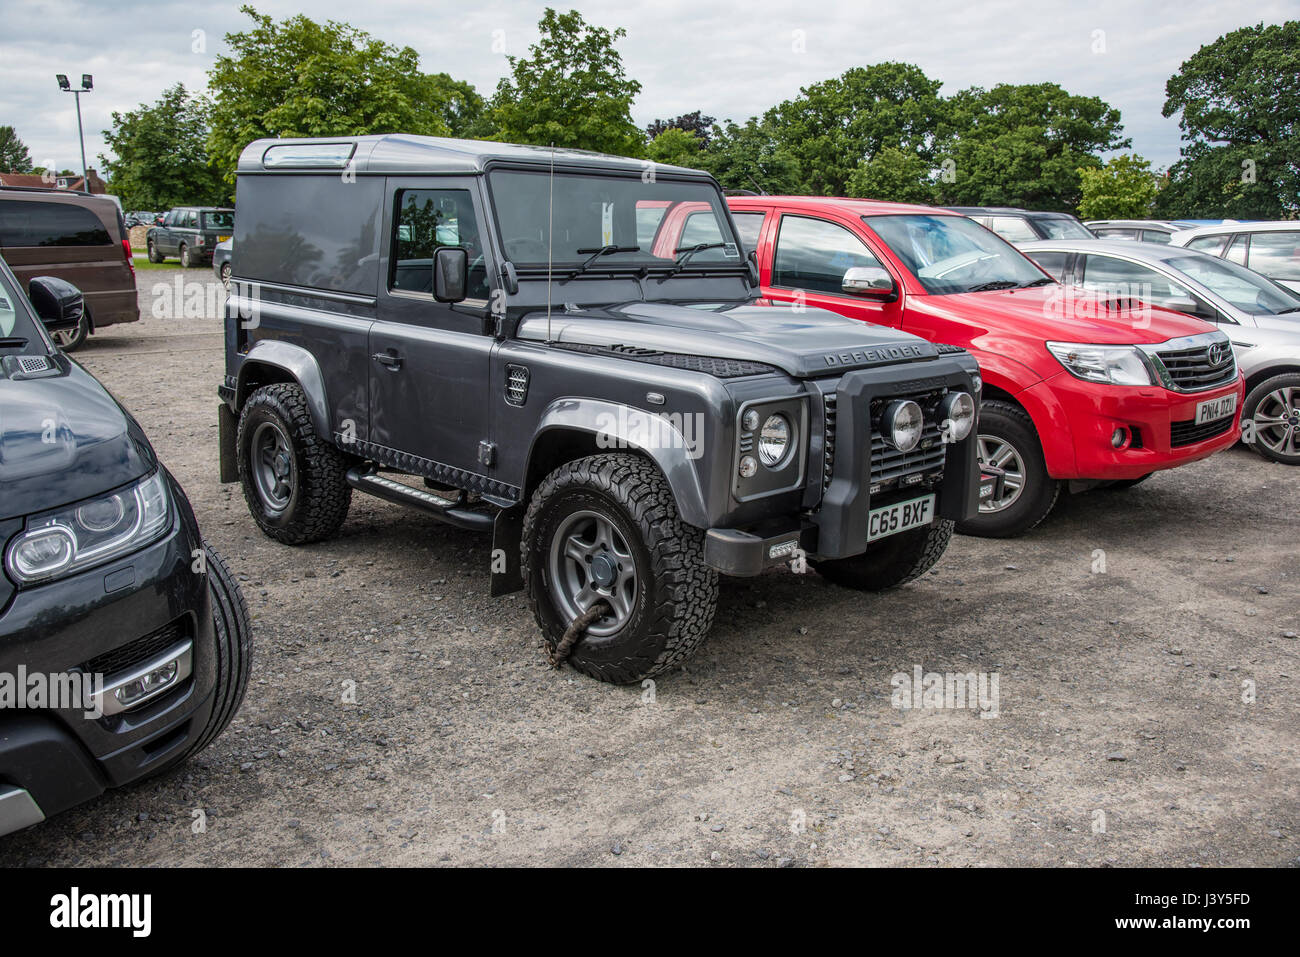 A new Landrover Defender with chain round the front wheel as theft protection in a car park, Harrogate, North Yorkshire. Stock Photo